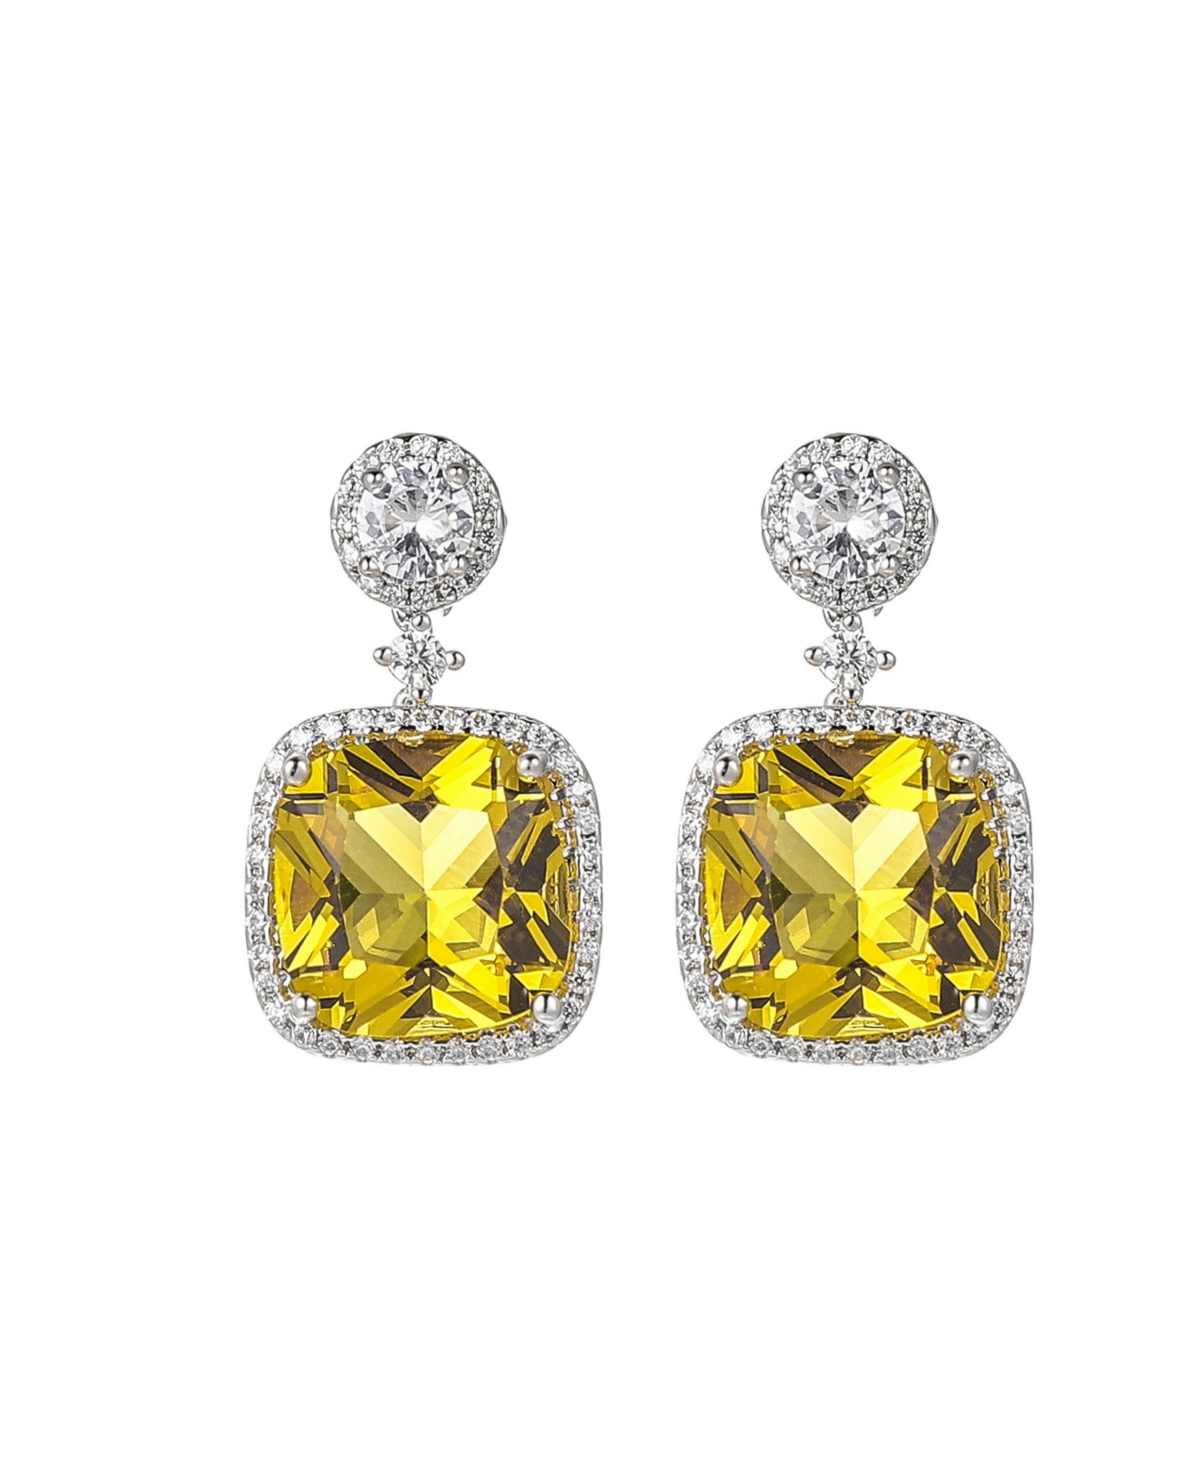 Silver-Tone Light Yellow Square Earrings - Silver-Tone